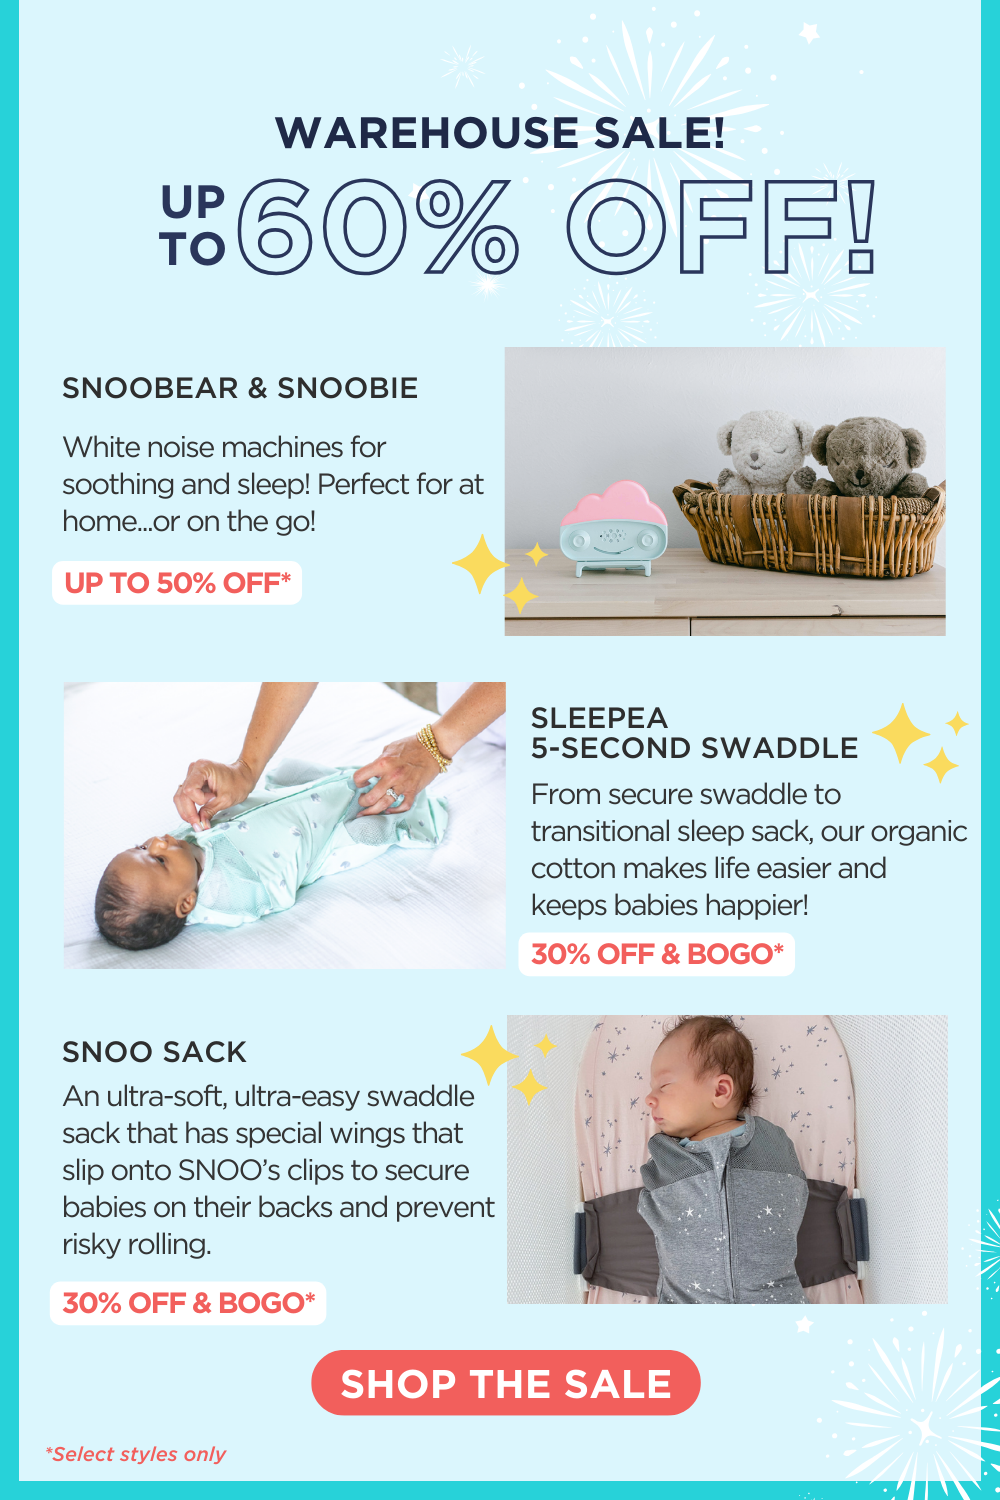 WAREHOUSE SALE! UP TO 60% OFF! SNOOBEAR & SNOOBIE: White noise machines for soothing and sleep! Perfect for at home...or on the go! UP TO 50% OFF*. SLEEPEA 5-SECOND SWADDLE: From secure swaddle to transitional sleep sack, our organic cotton makes life easier and keeps babies happier! 30% OFF & BOGO*. SNOO SACK: An ultra-soft, ultra-easy swaddle sack that has special wings that slip onto SNOO’s clips to secure babies on their backs and prevent risky rolling. 30% OFF & BOGO* SHOP THE SALE. *Select styles only